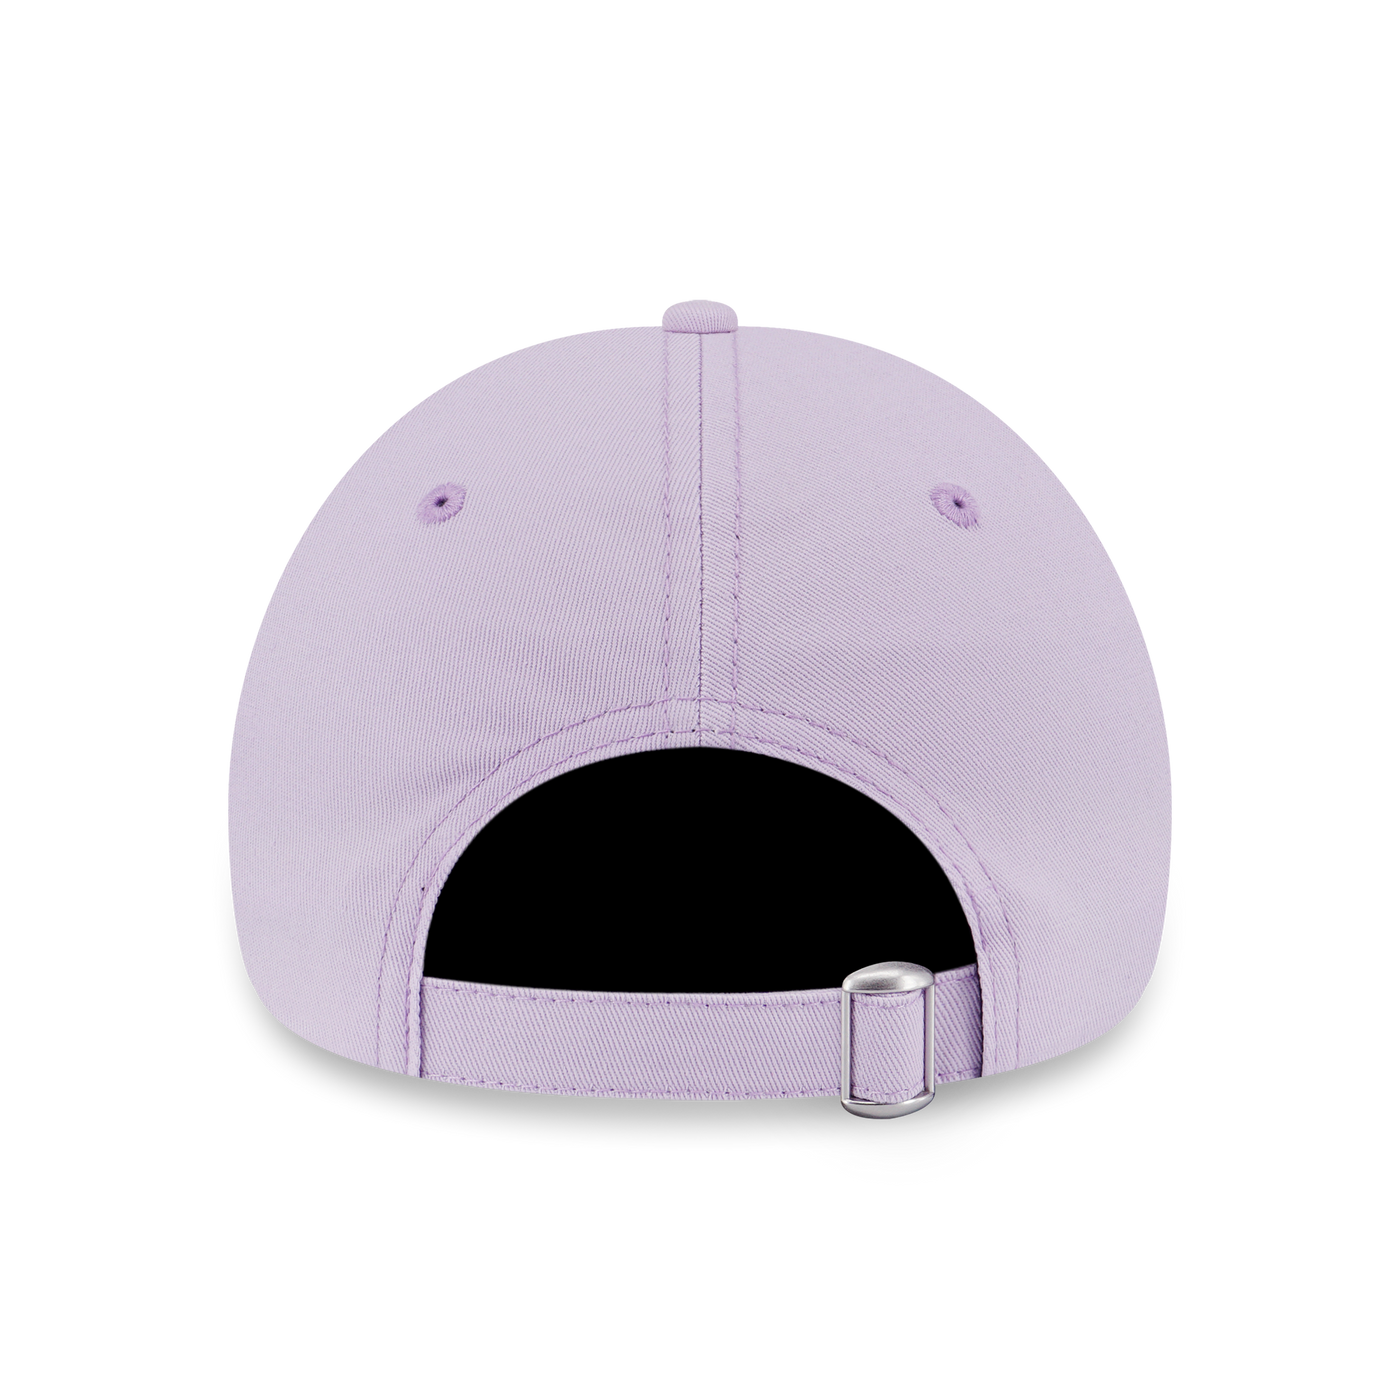 NEW YORK YANKEES COLOR ERA SMALL LOGO PASTEL LILAC 9FORTY CAP